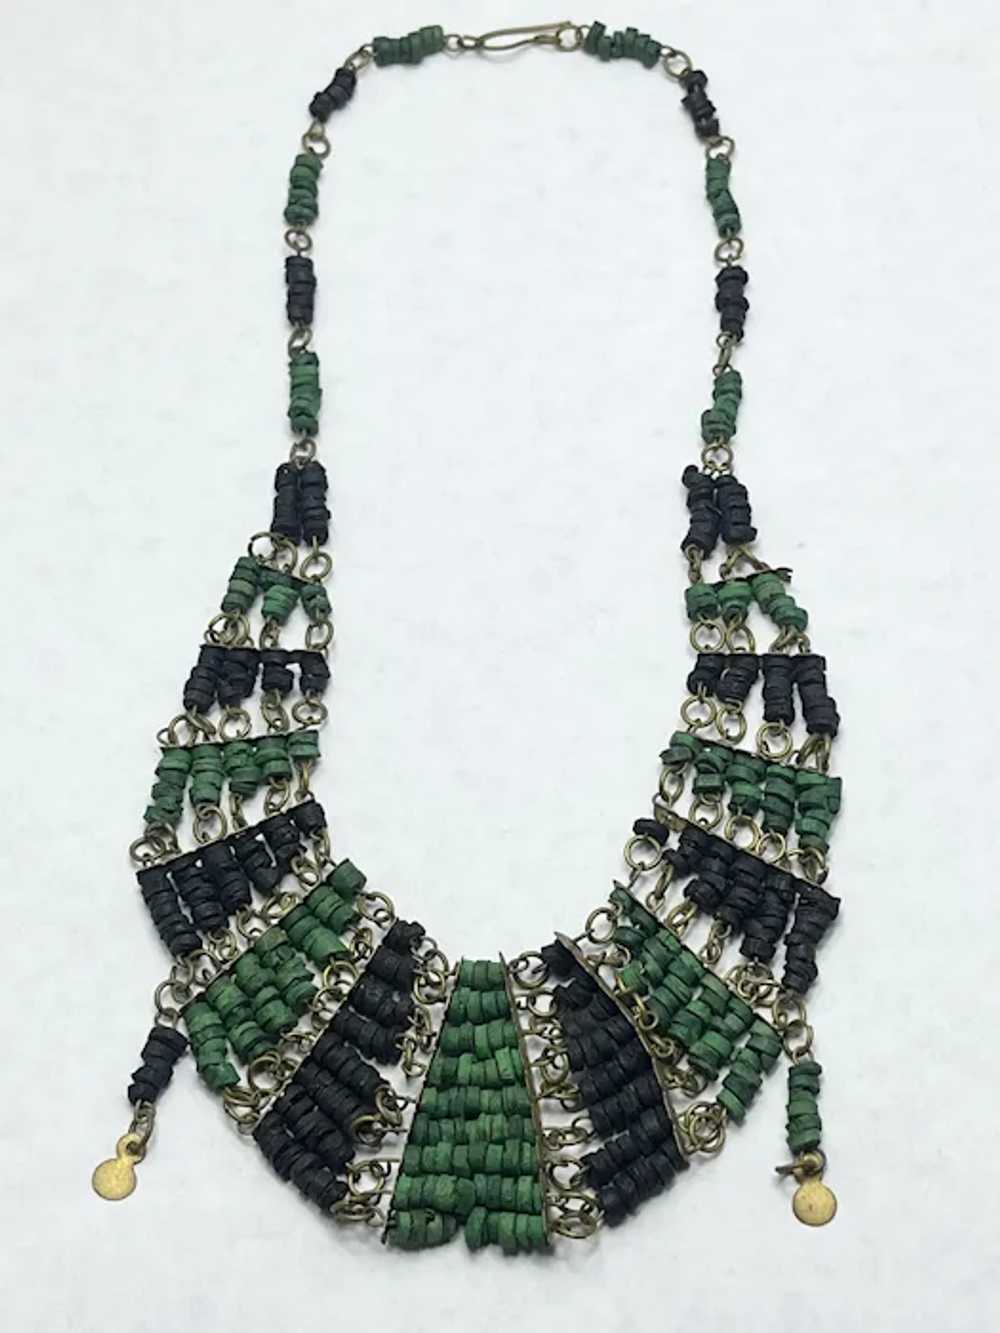 Vintage Egyptian Revival Faience Beaded Necklace - image 3